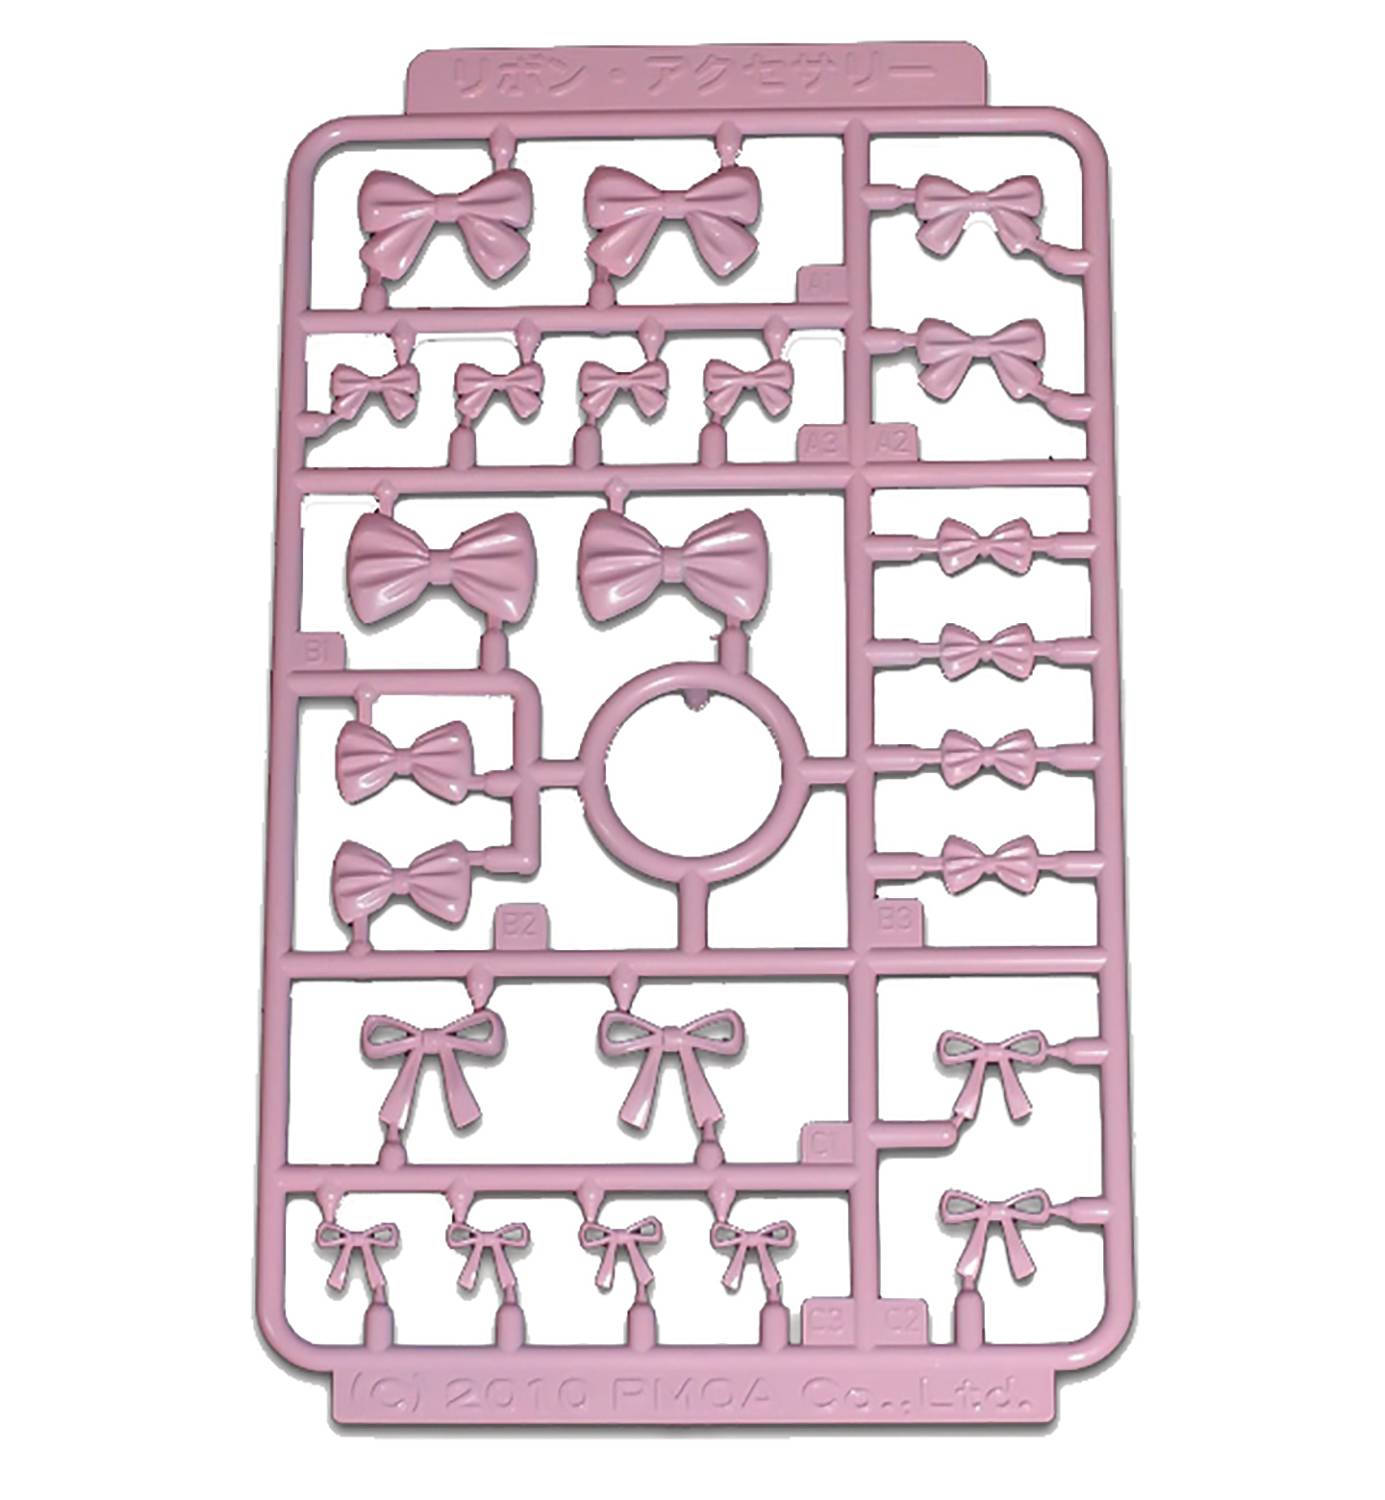 MODELING SUPPLY RIBBON ACCESSARY 1 PINK NON-SCALE MDL KIT (C